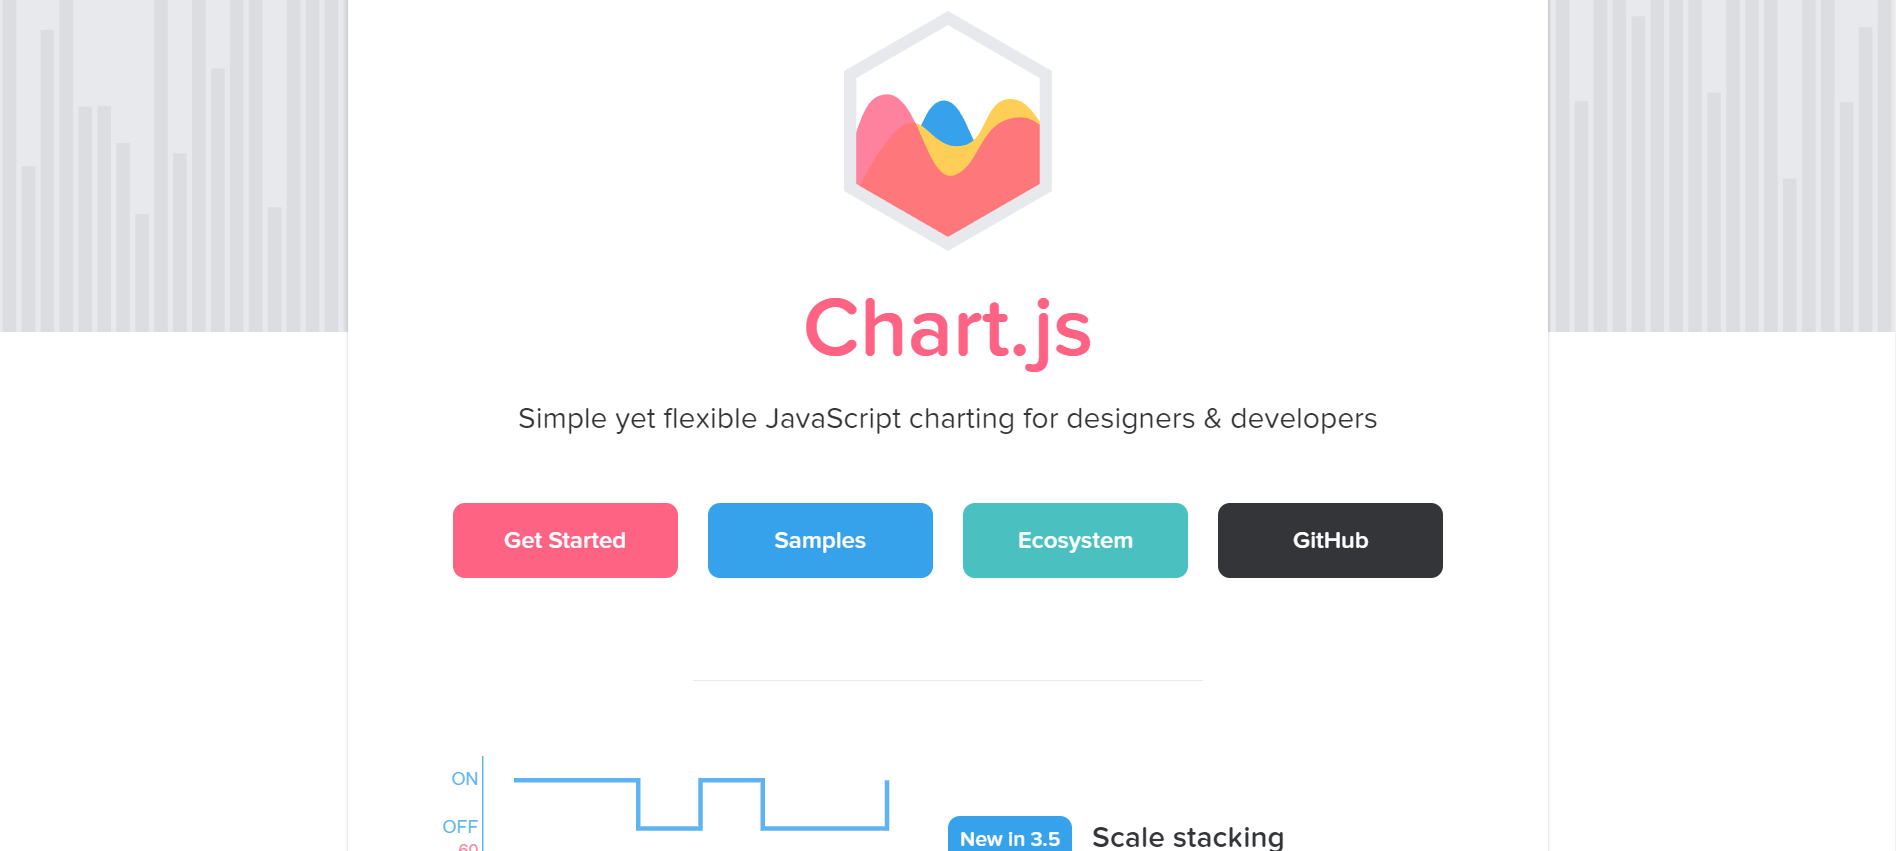 15 Best JavaScript Chart Libraries in 2022